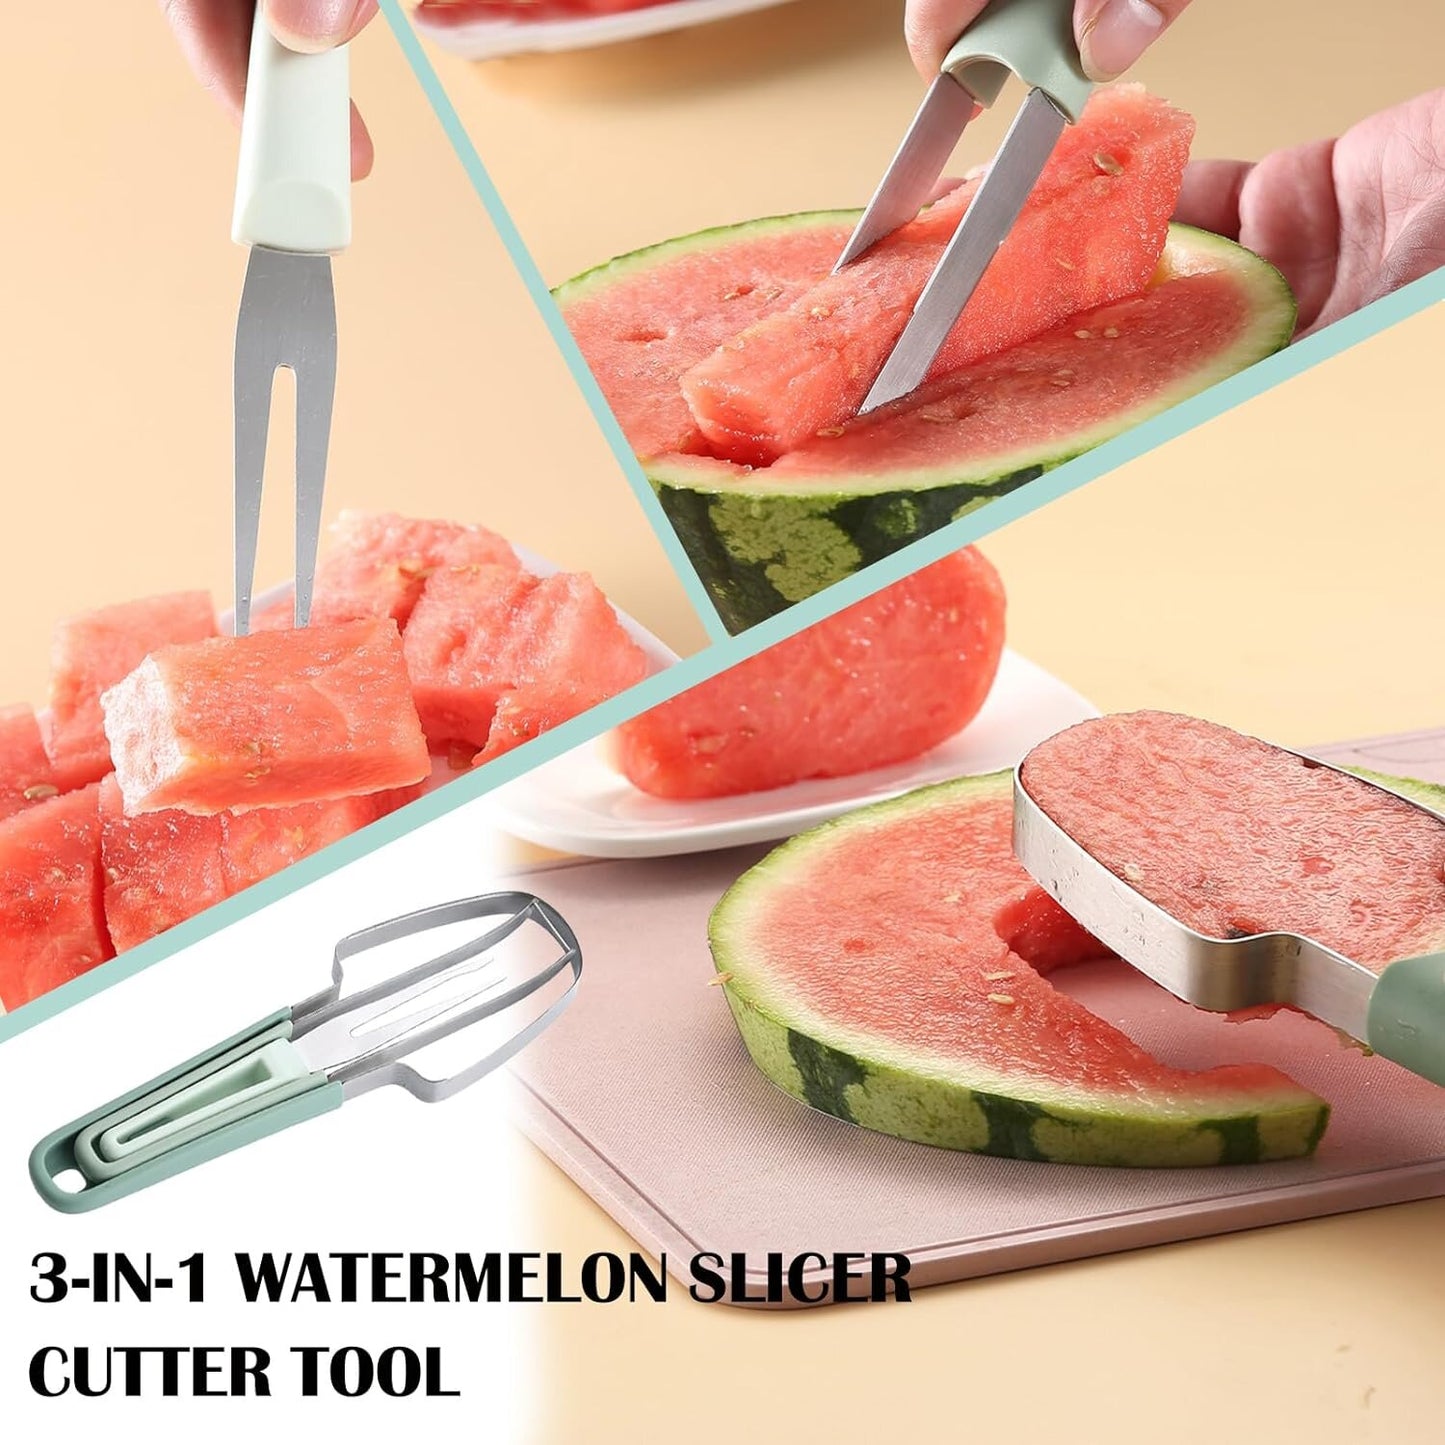 Ensured Durability: Because our watermelon slicer is constructed with wear-resistant food grade PP and stainless steel, you'll easily achieve perfect slices and enjoy safe, durable, and satisfying cutting experience each time.